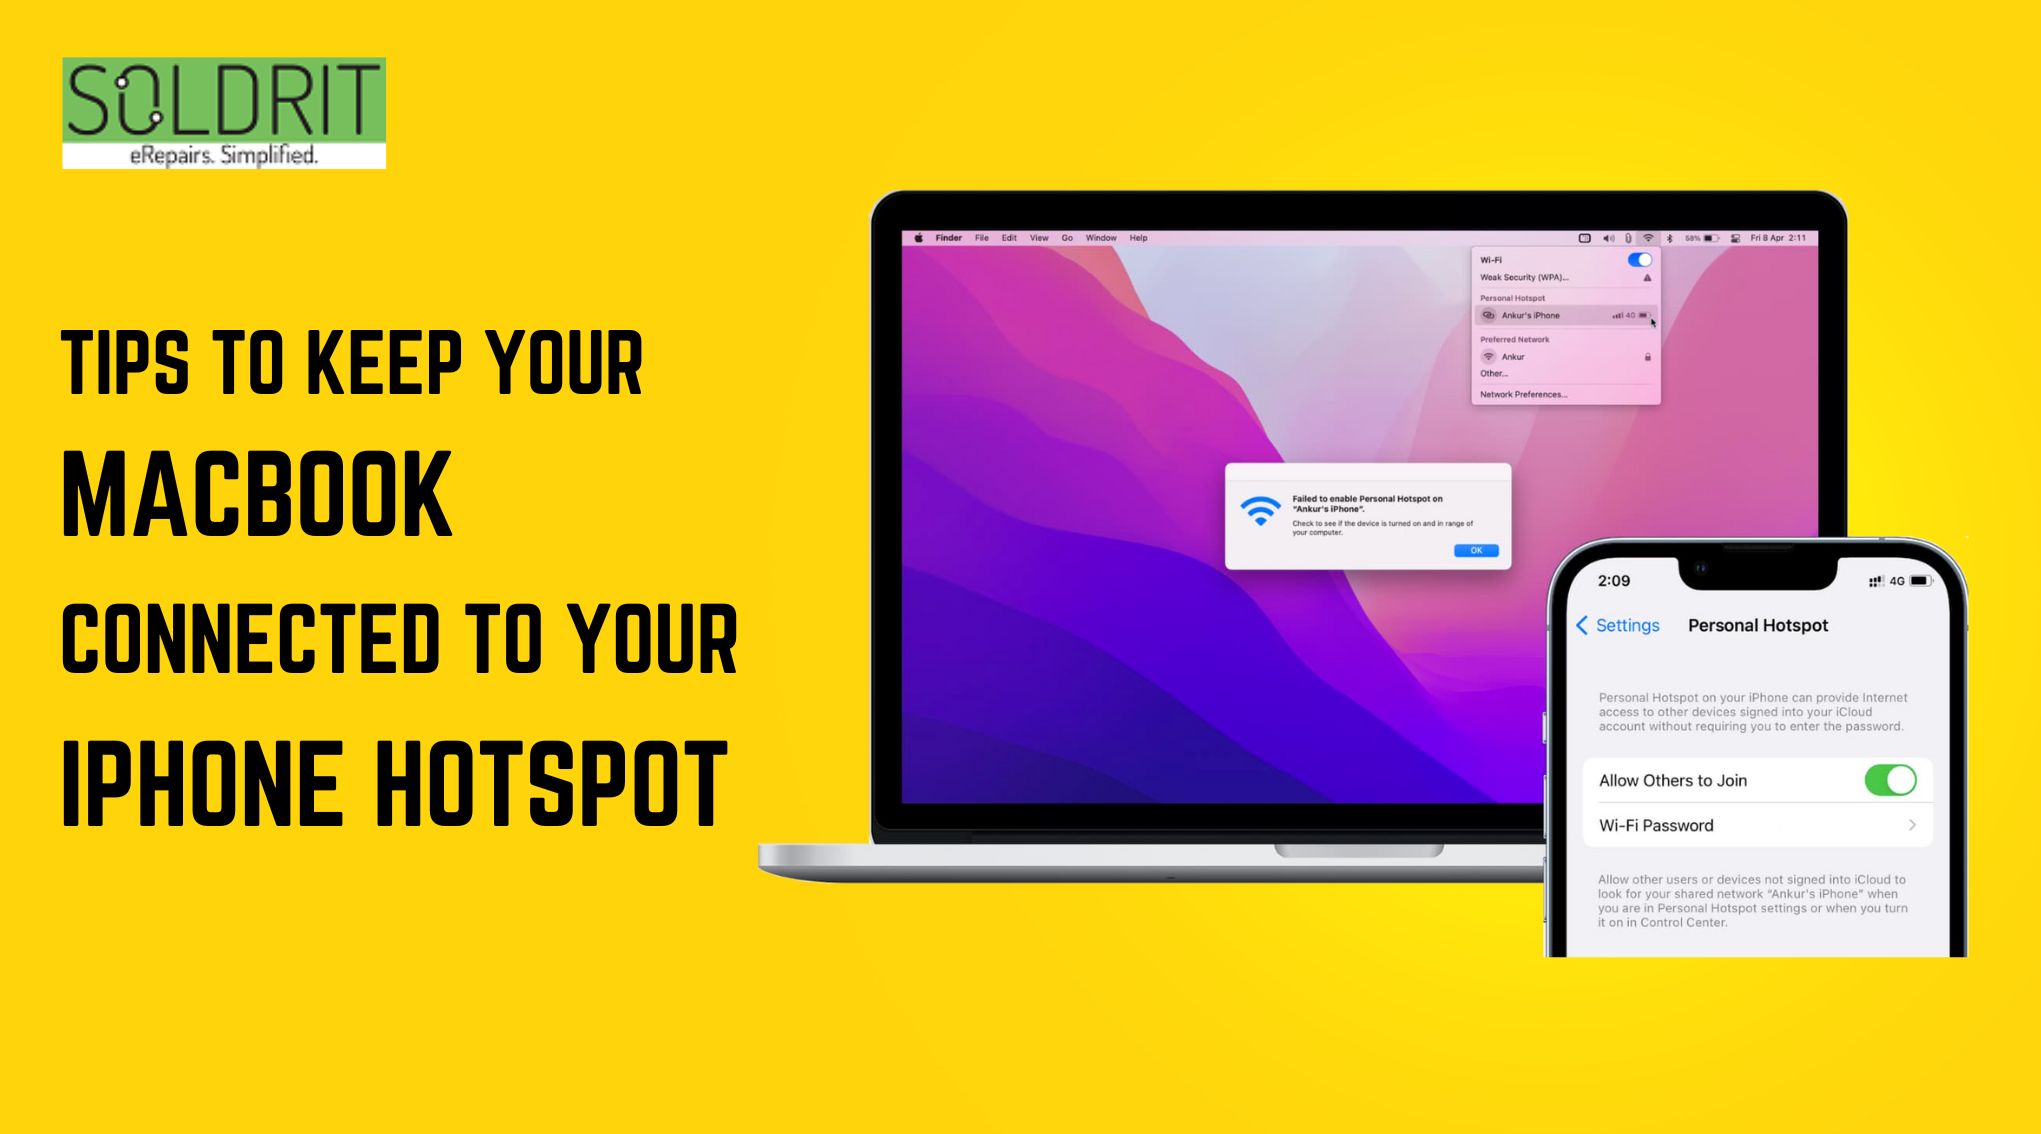 Tips to keep your MacBook connected to your iPhone hotspot